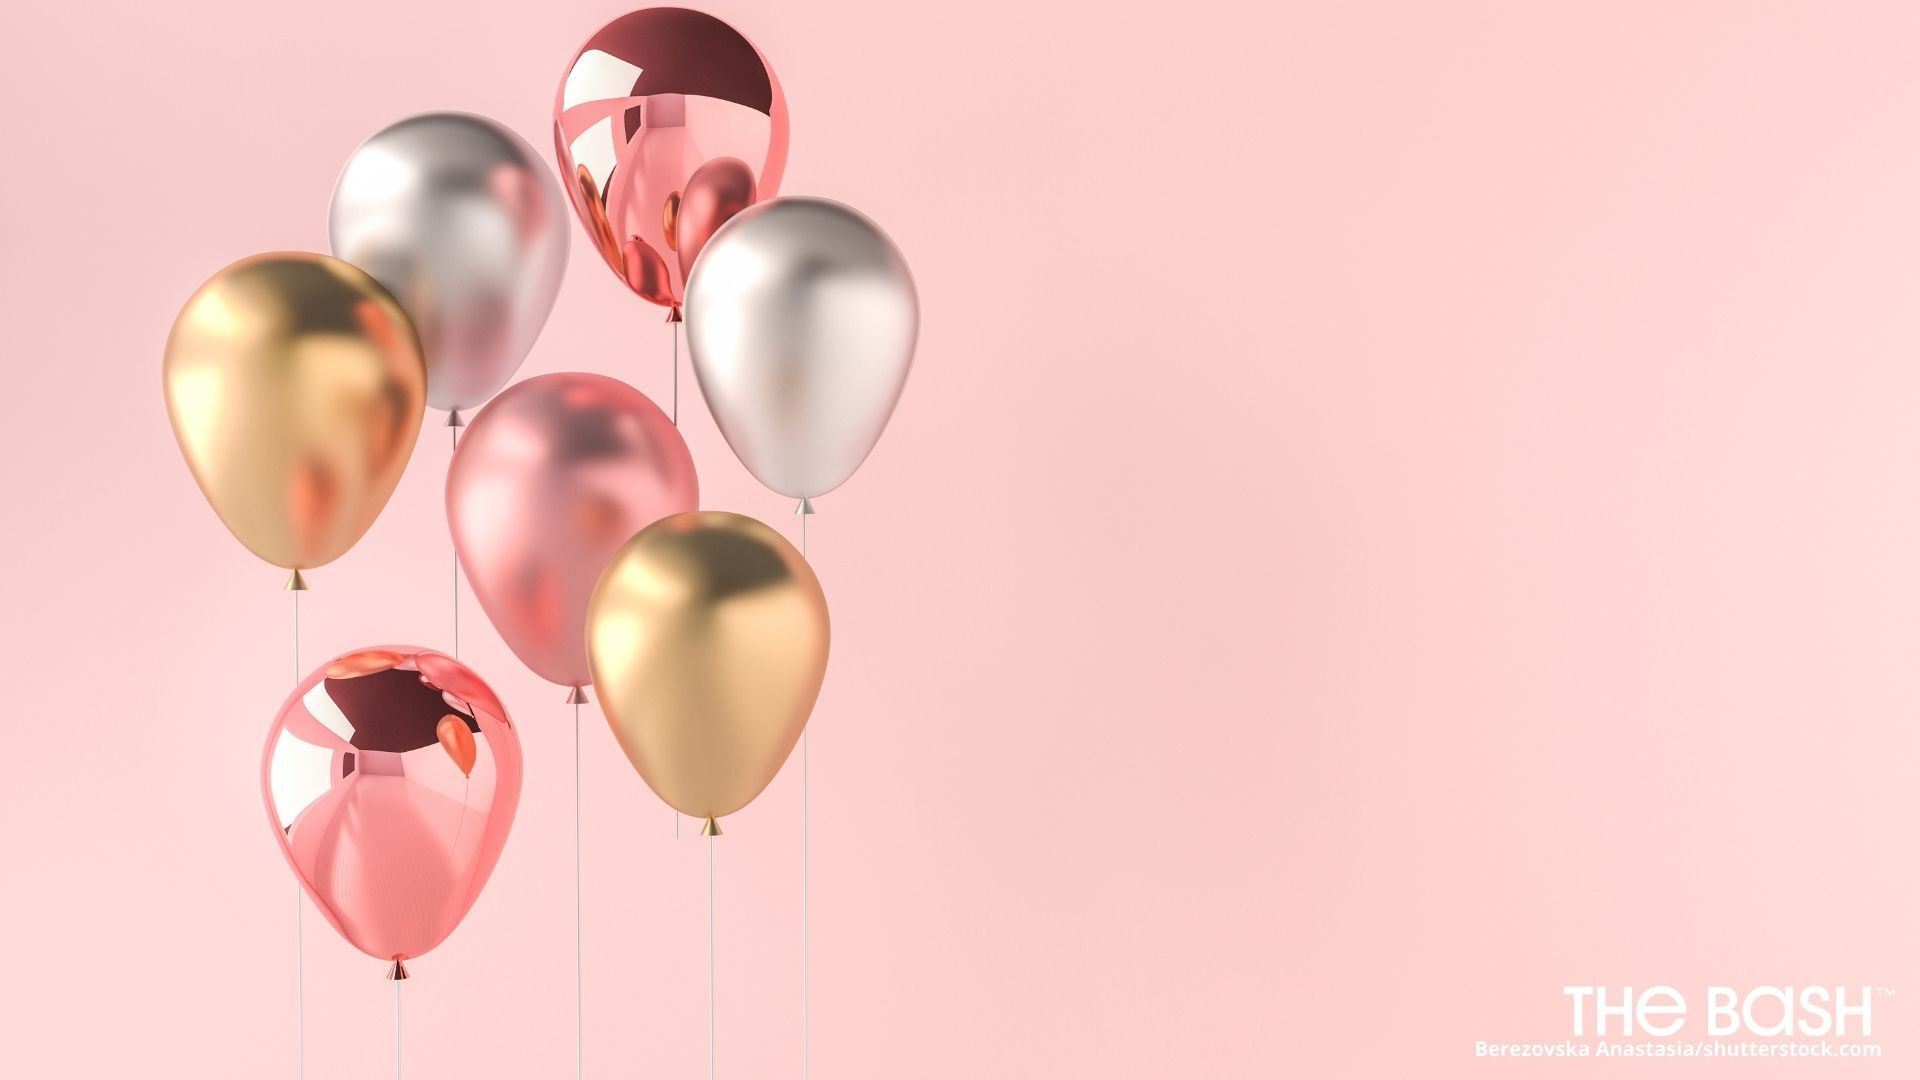 Download 21 celebration-background-hd Colorful-balloons-and-party-streamers-on-pink-festive-background...jpg